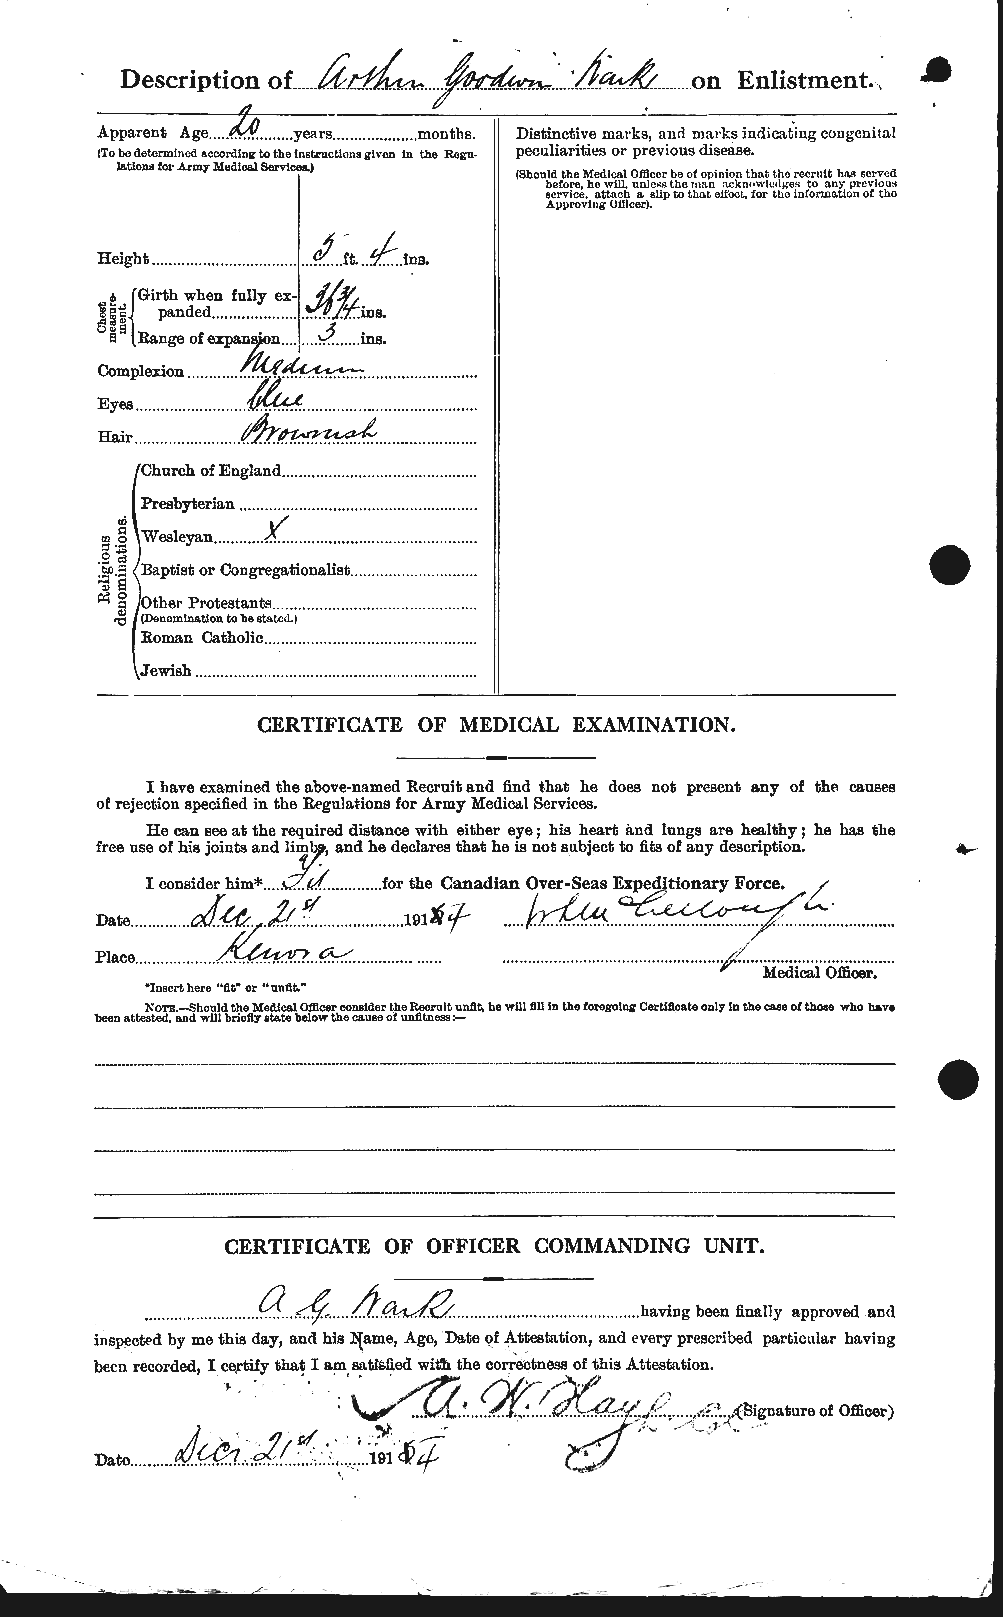 Personnel Records of the First World War - CEF 657168b